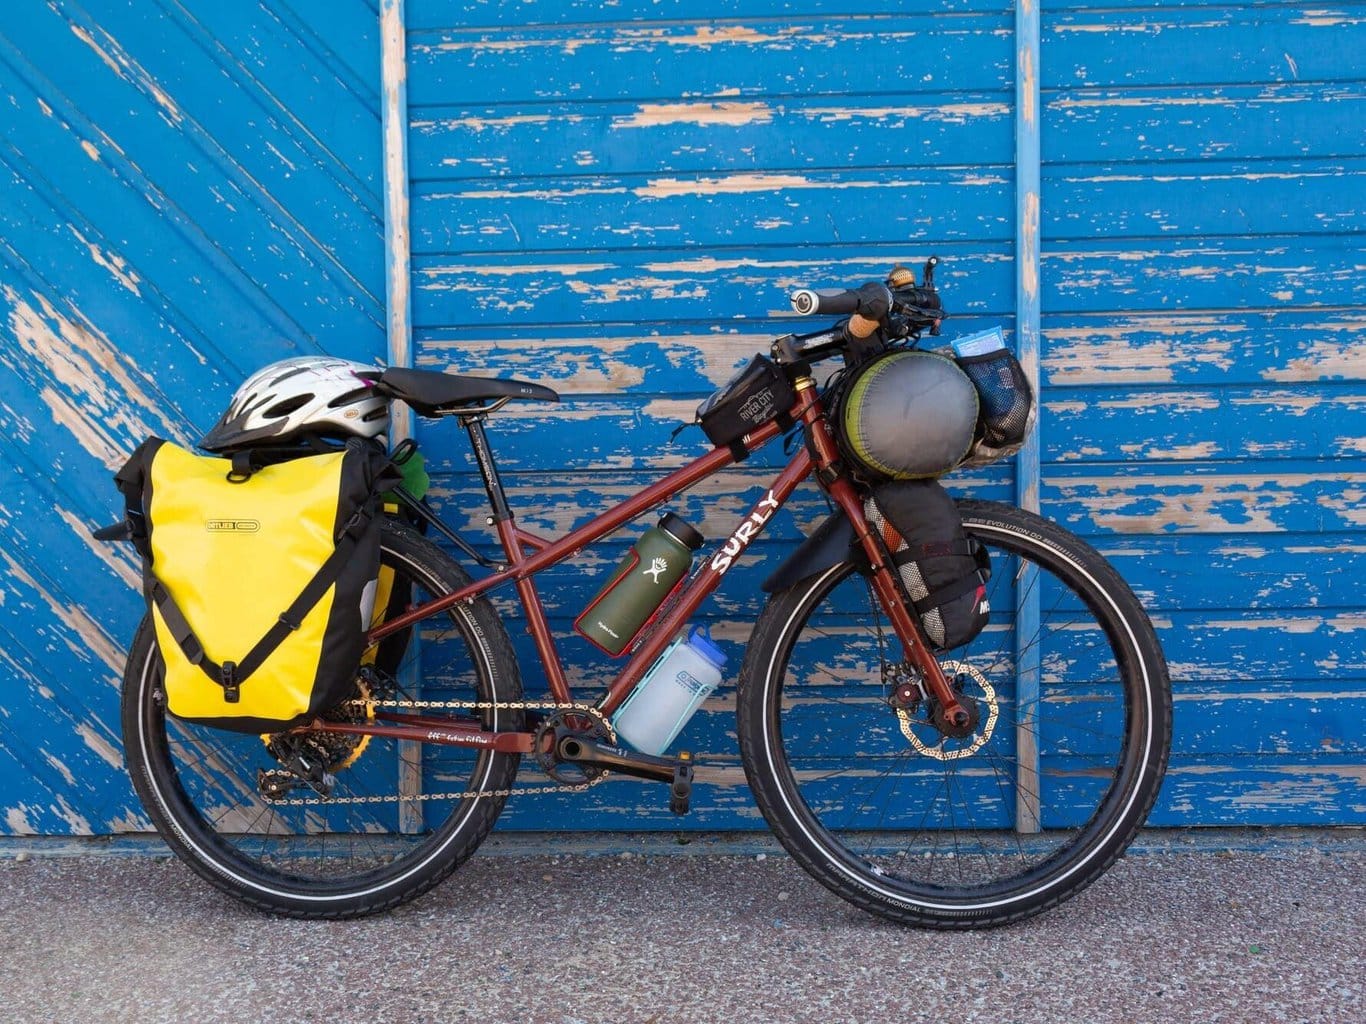 Bike touring bike loaded with gear and bags